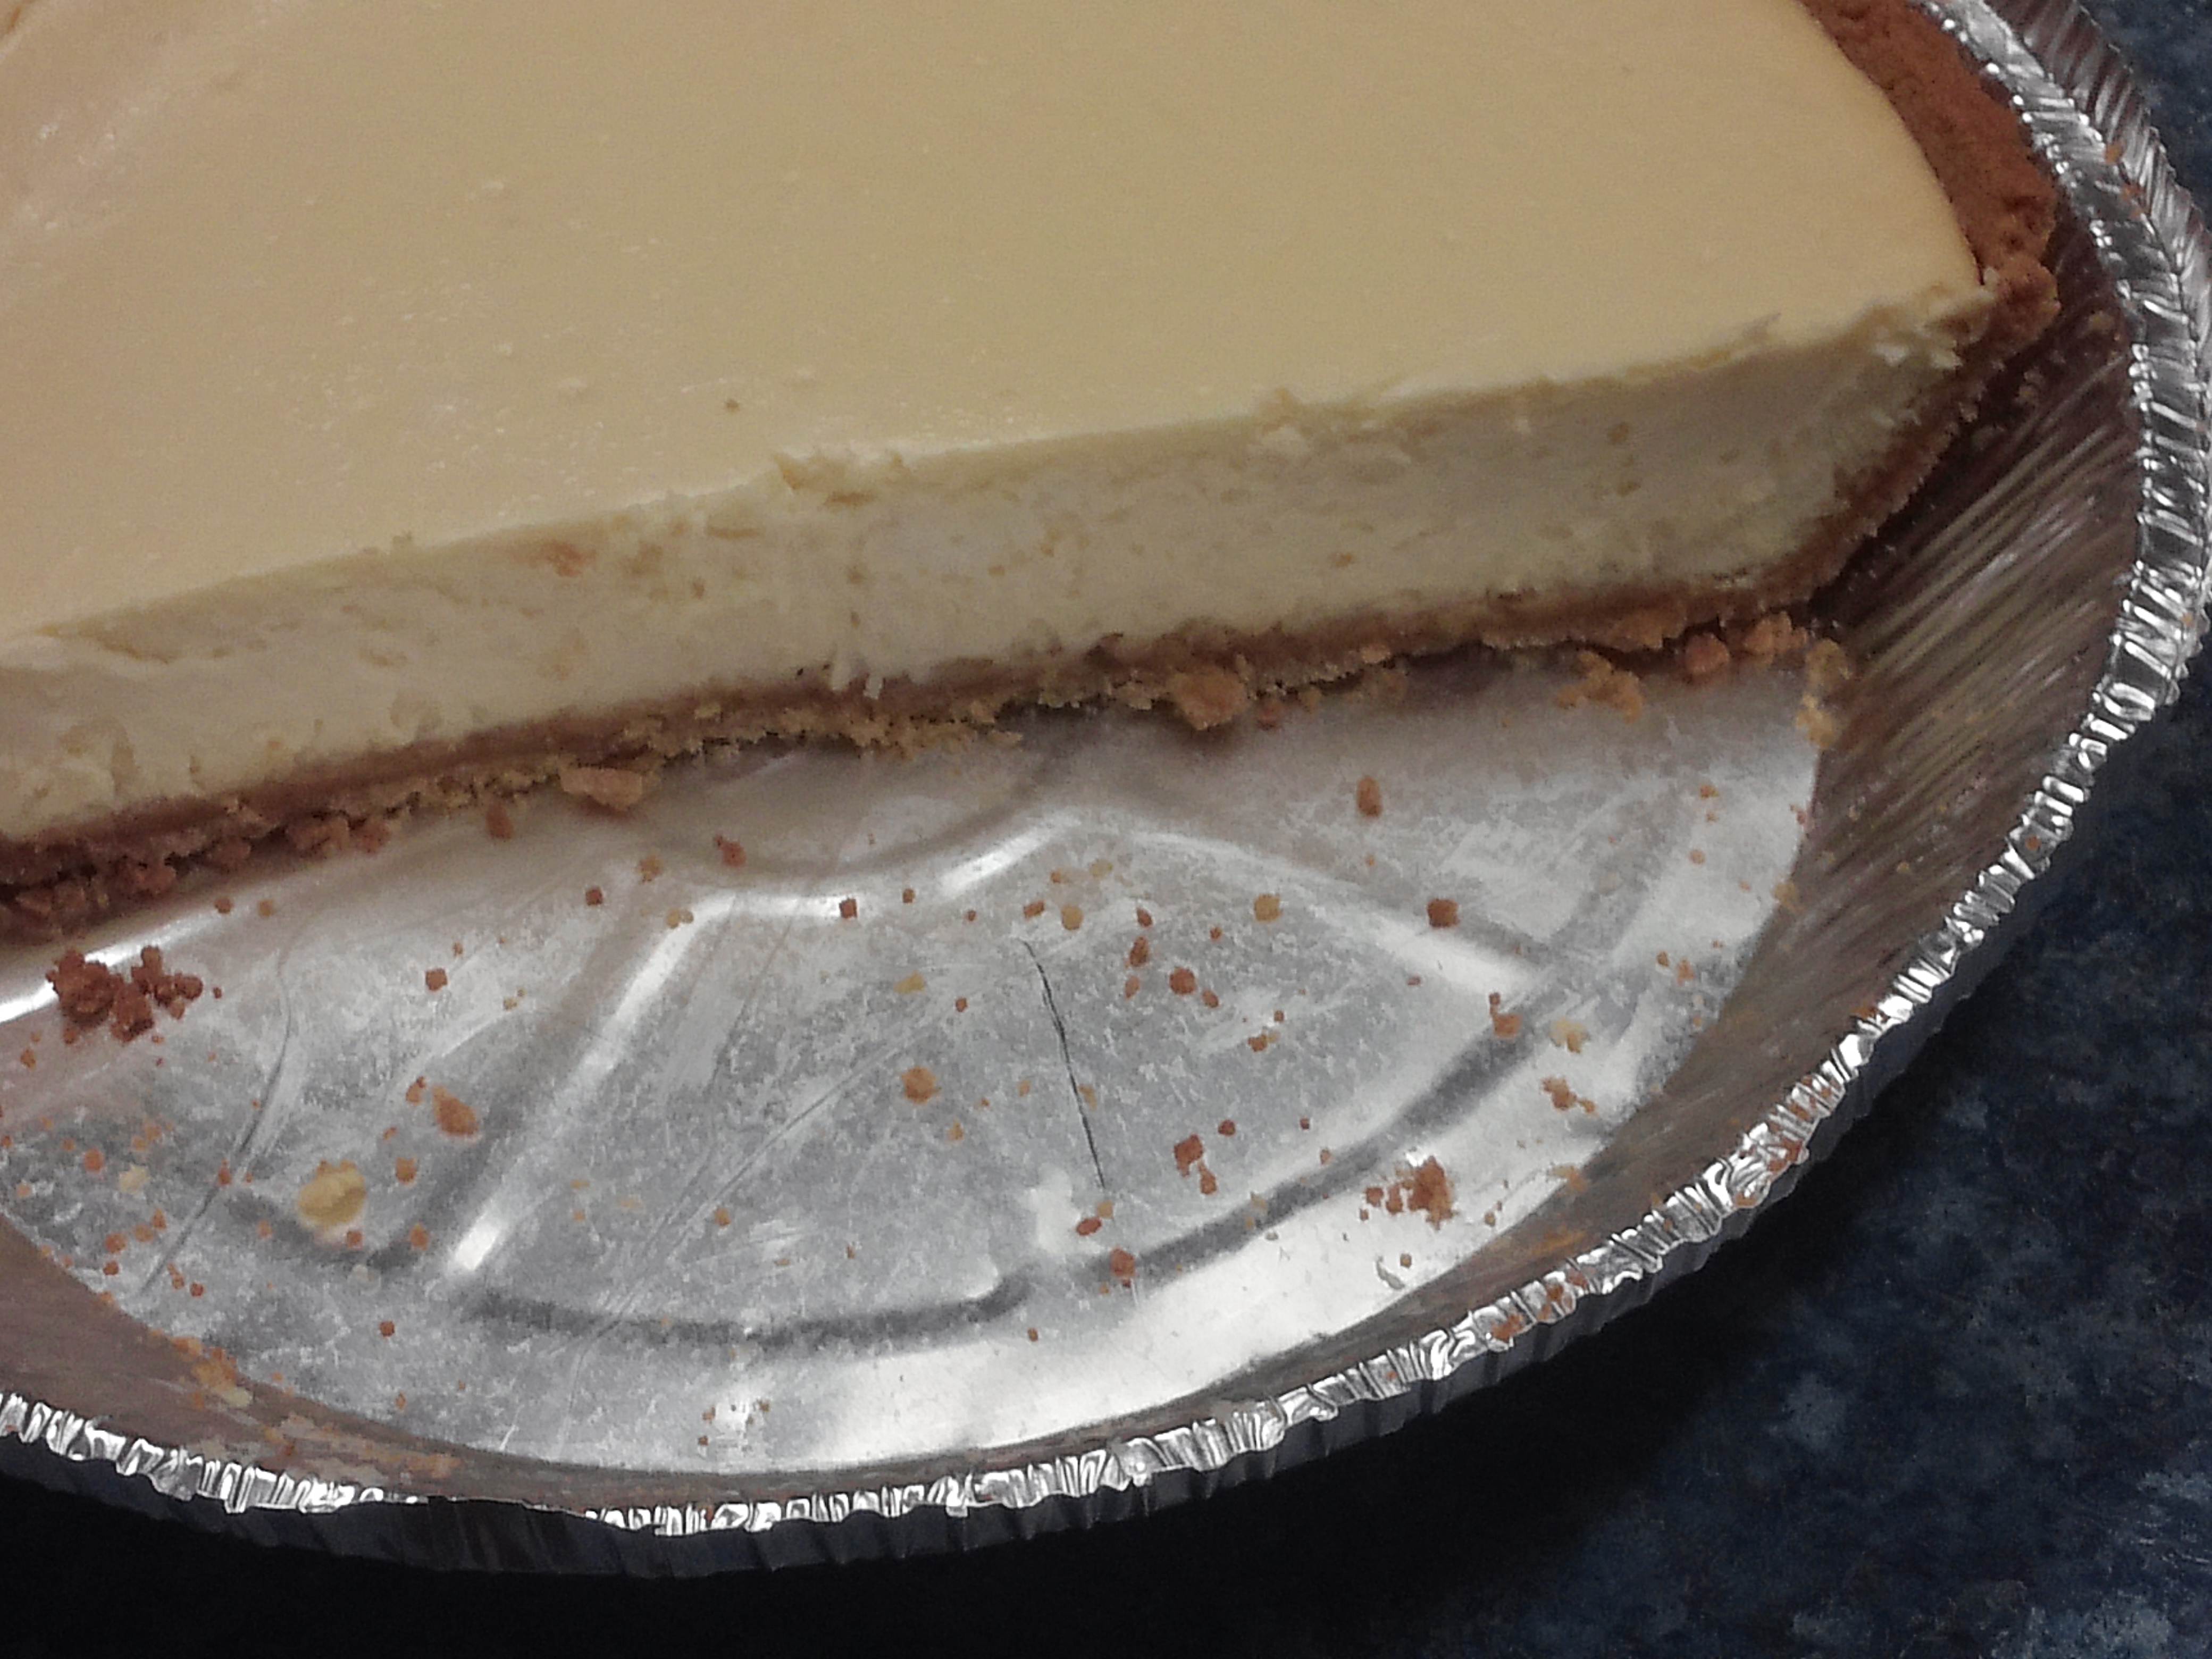 Lemon-Lime Cheesecake with Neufchatel Cheese